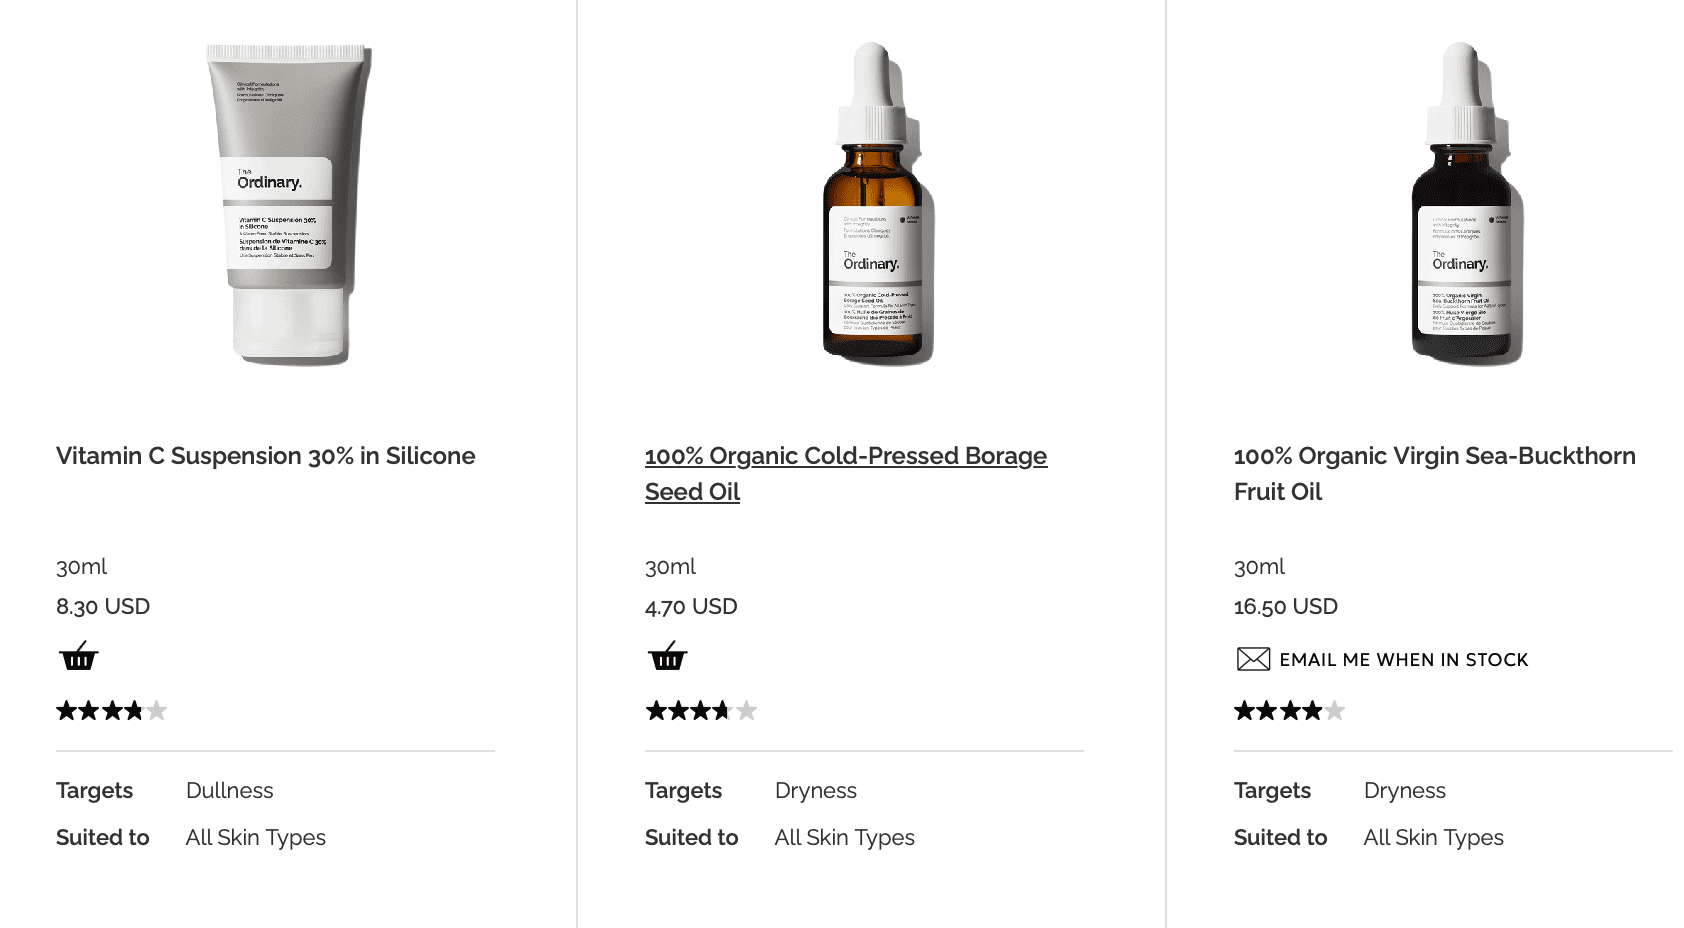 The Ordinary Products Discontinued